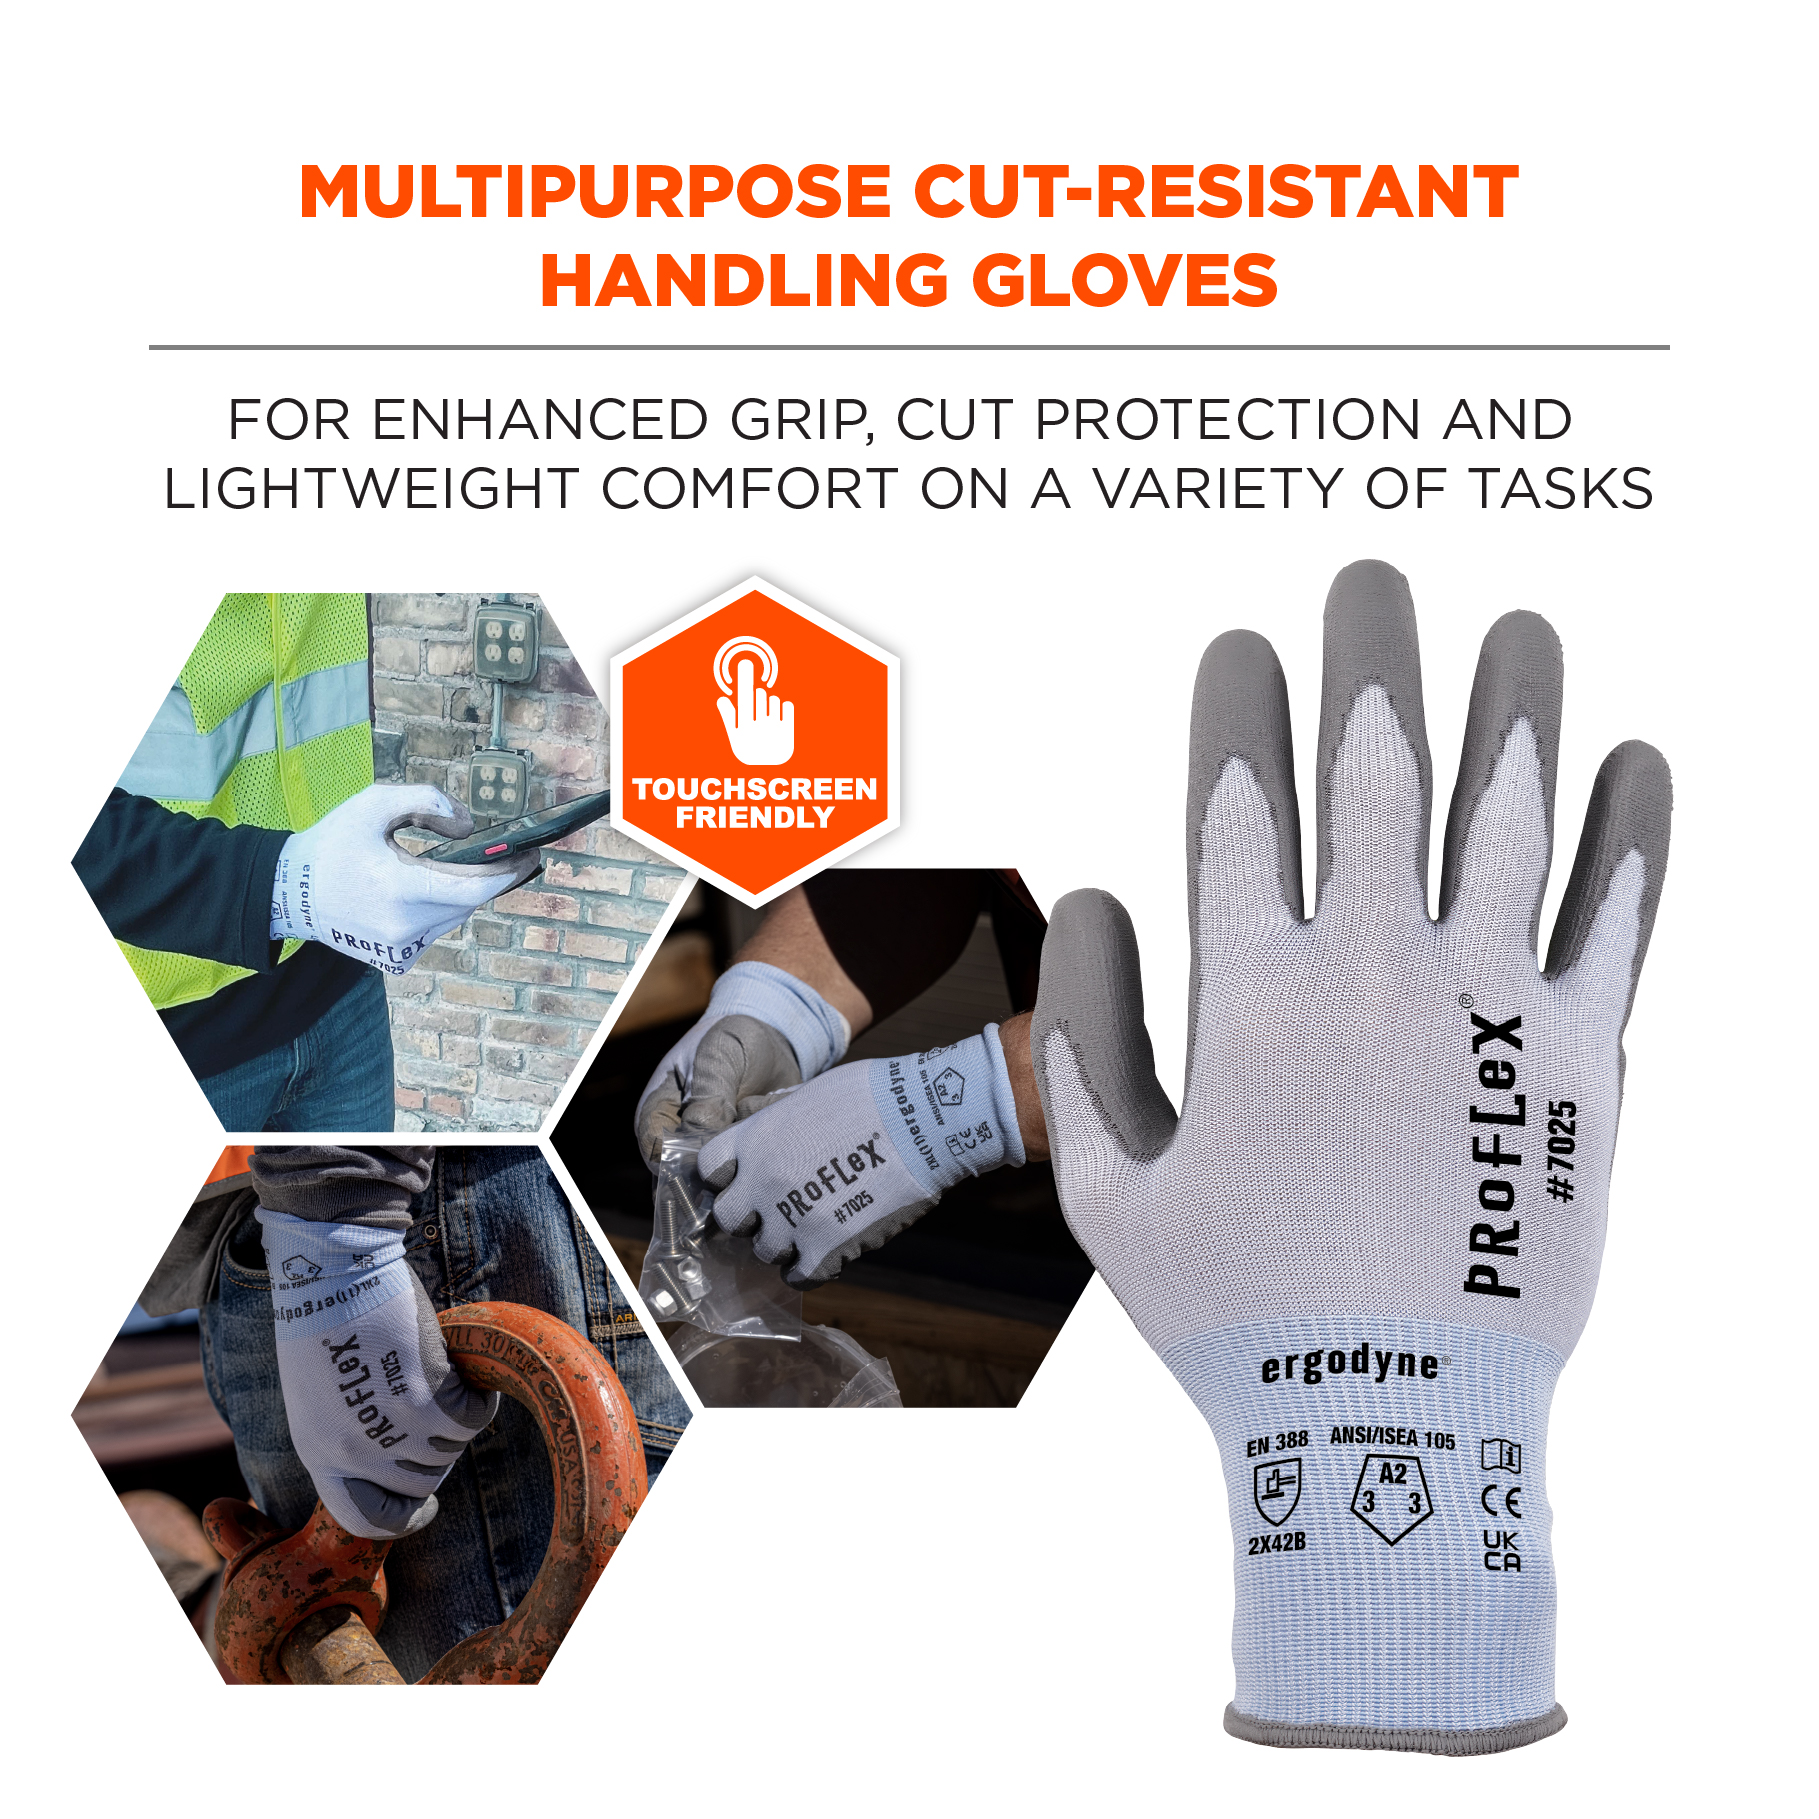 Nitrile Dipped Safety Work Gloves, Cut Resistant, Grey, Size: S/M/L/XL/2XL